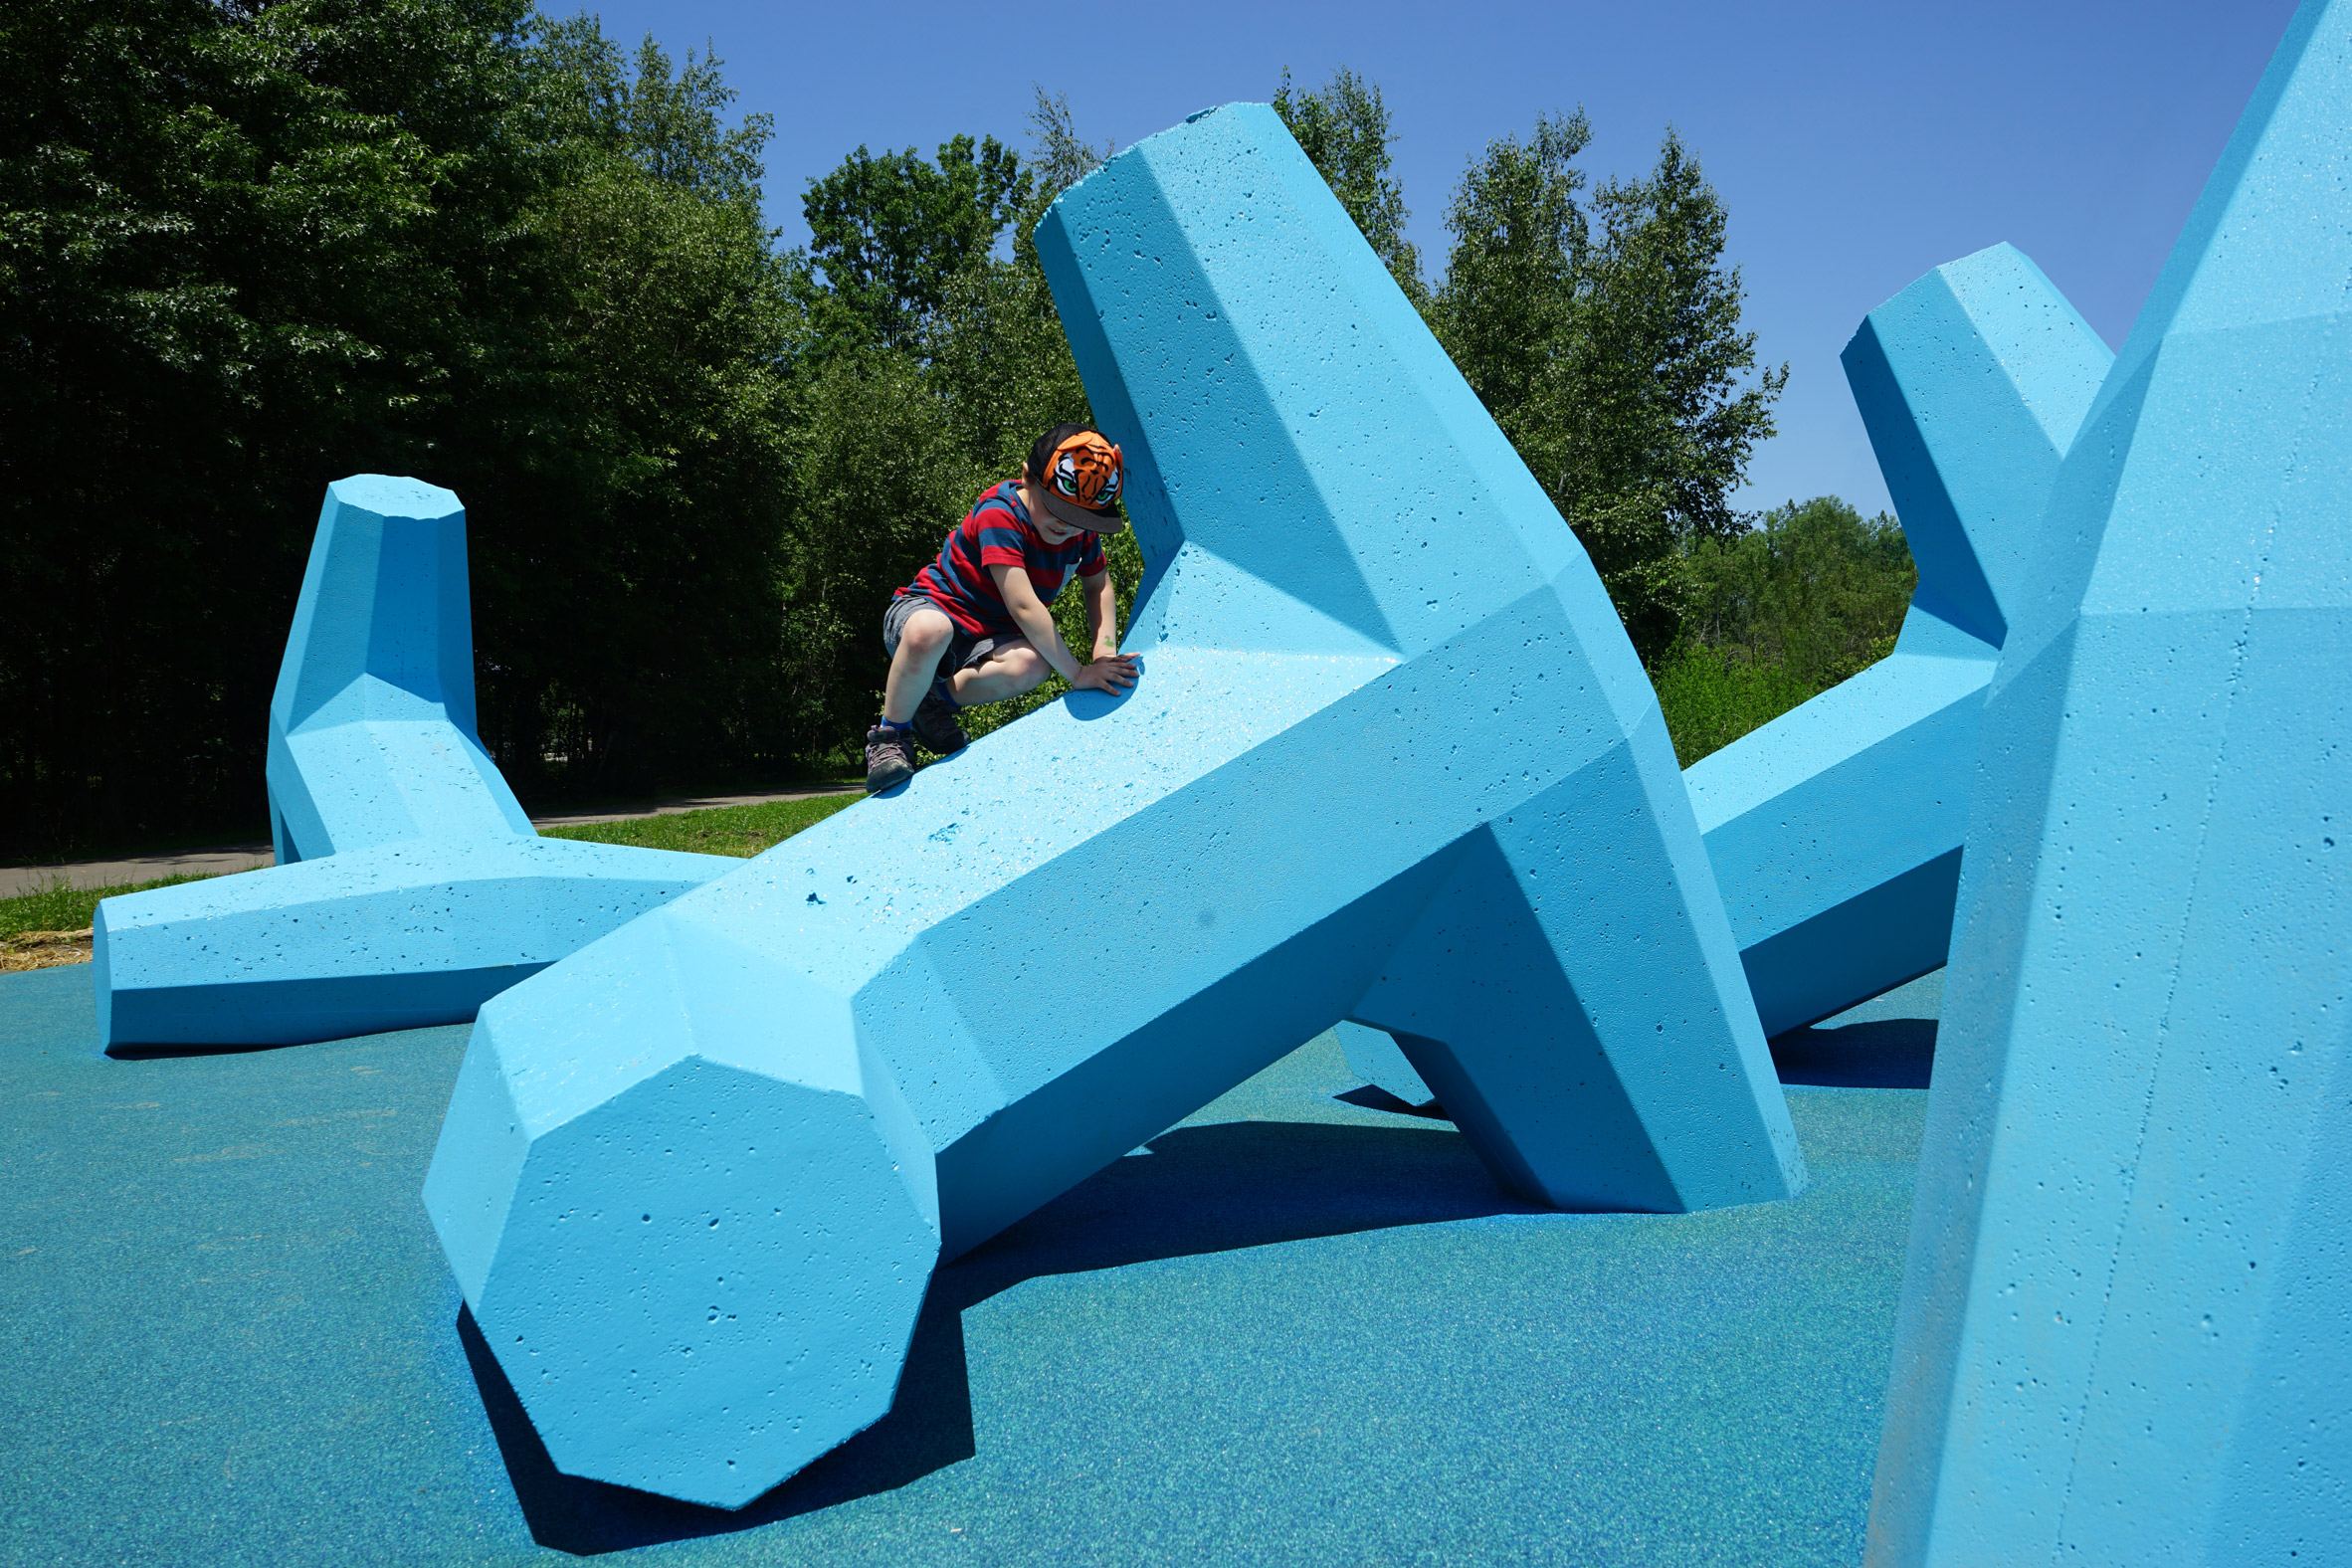 The playground's rubber surface acts as fall protection